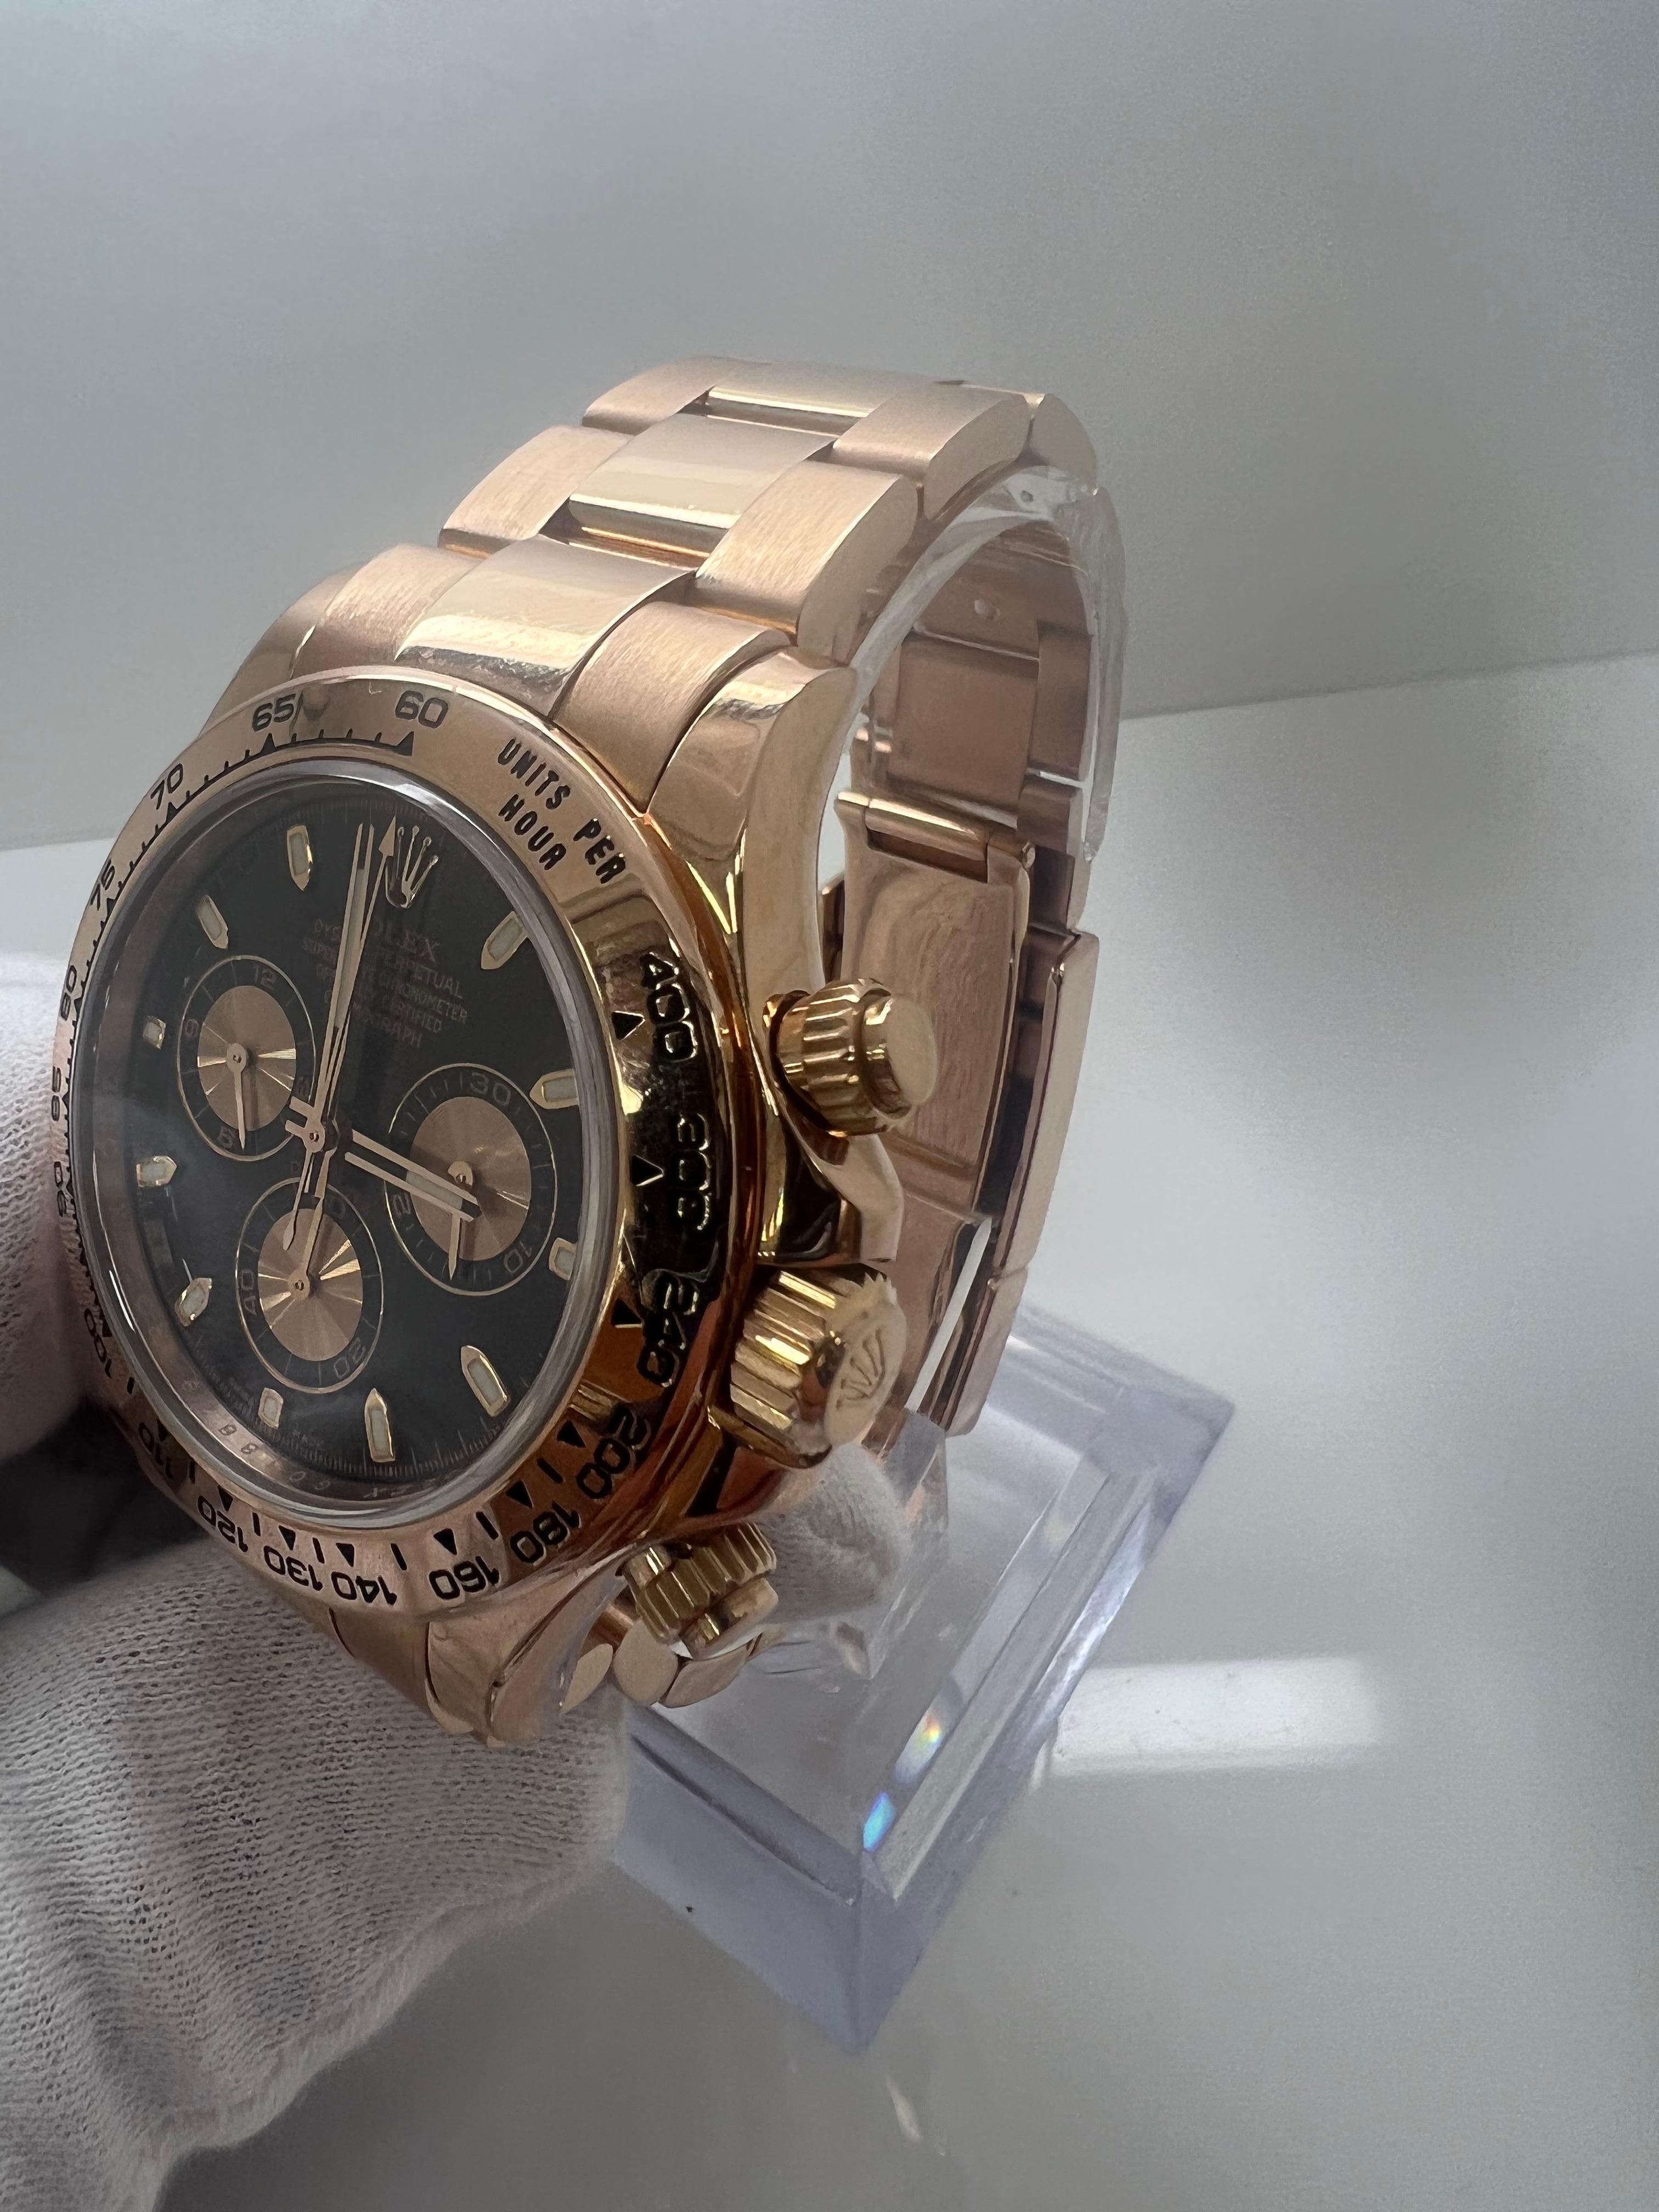 Rolex Daytona Rose Gold Black Dial Complete Set Mens Watch

Excellent condition

all original parts

circa 2010

comes with original box papers tag

bank wire only shop with confidence 